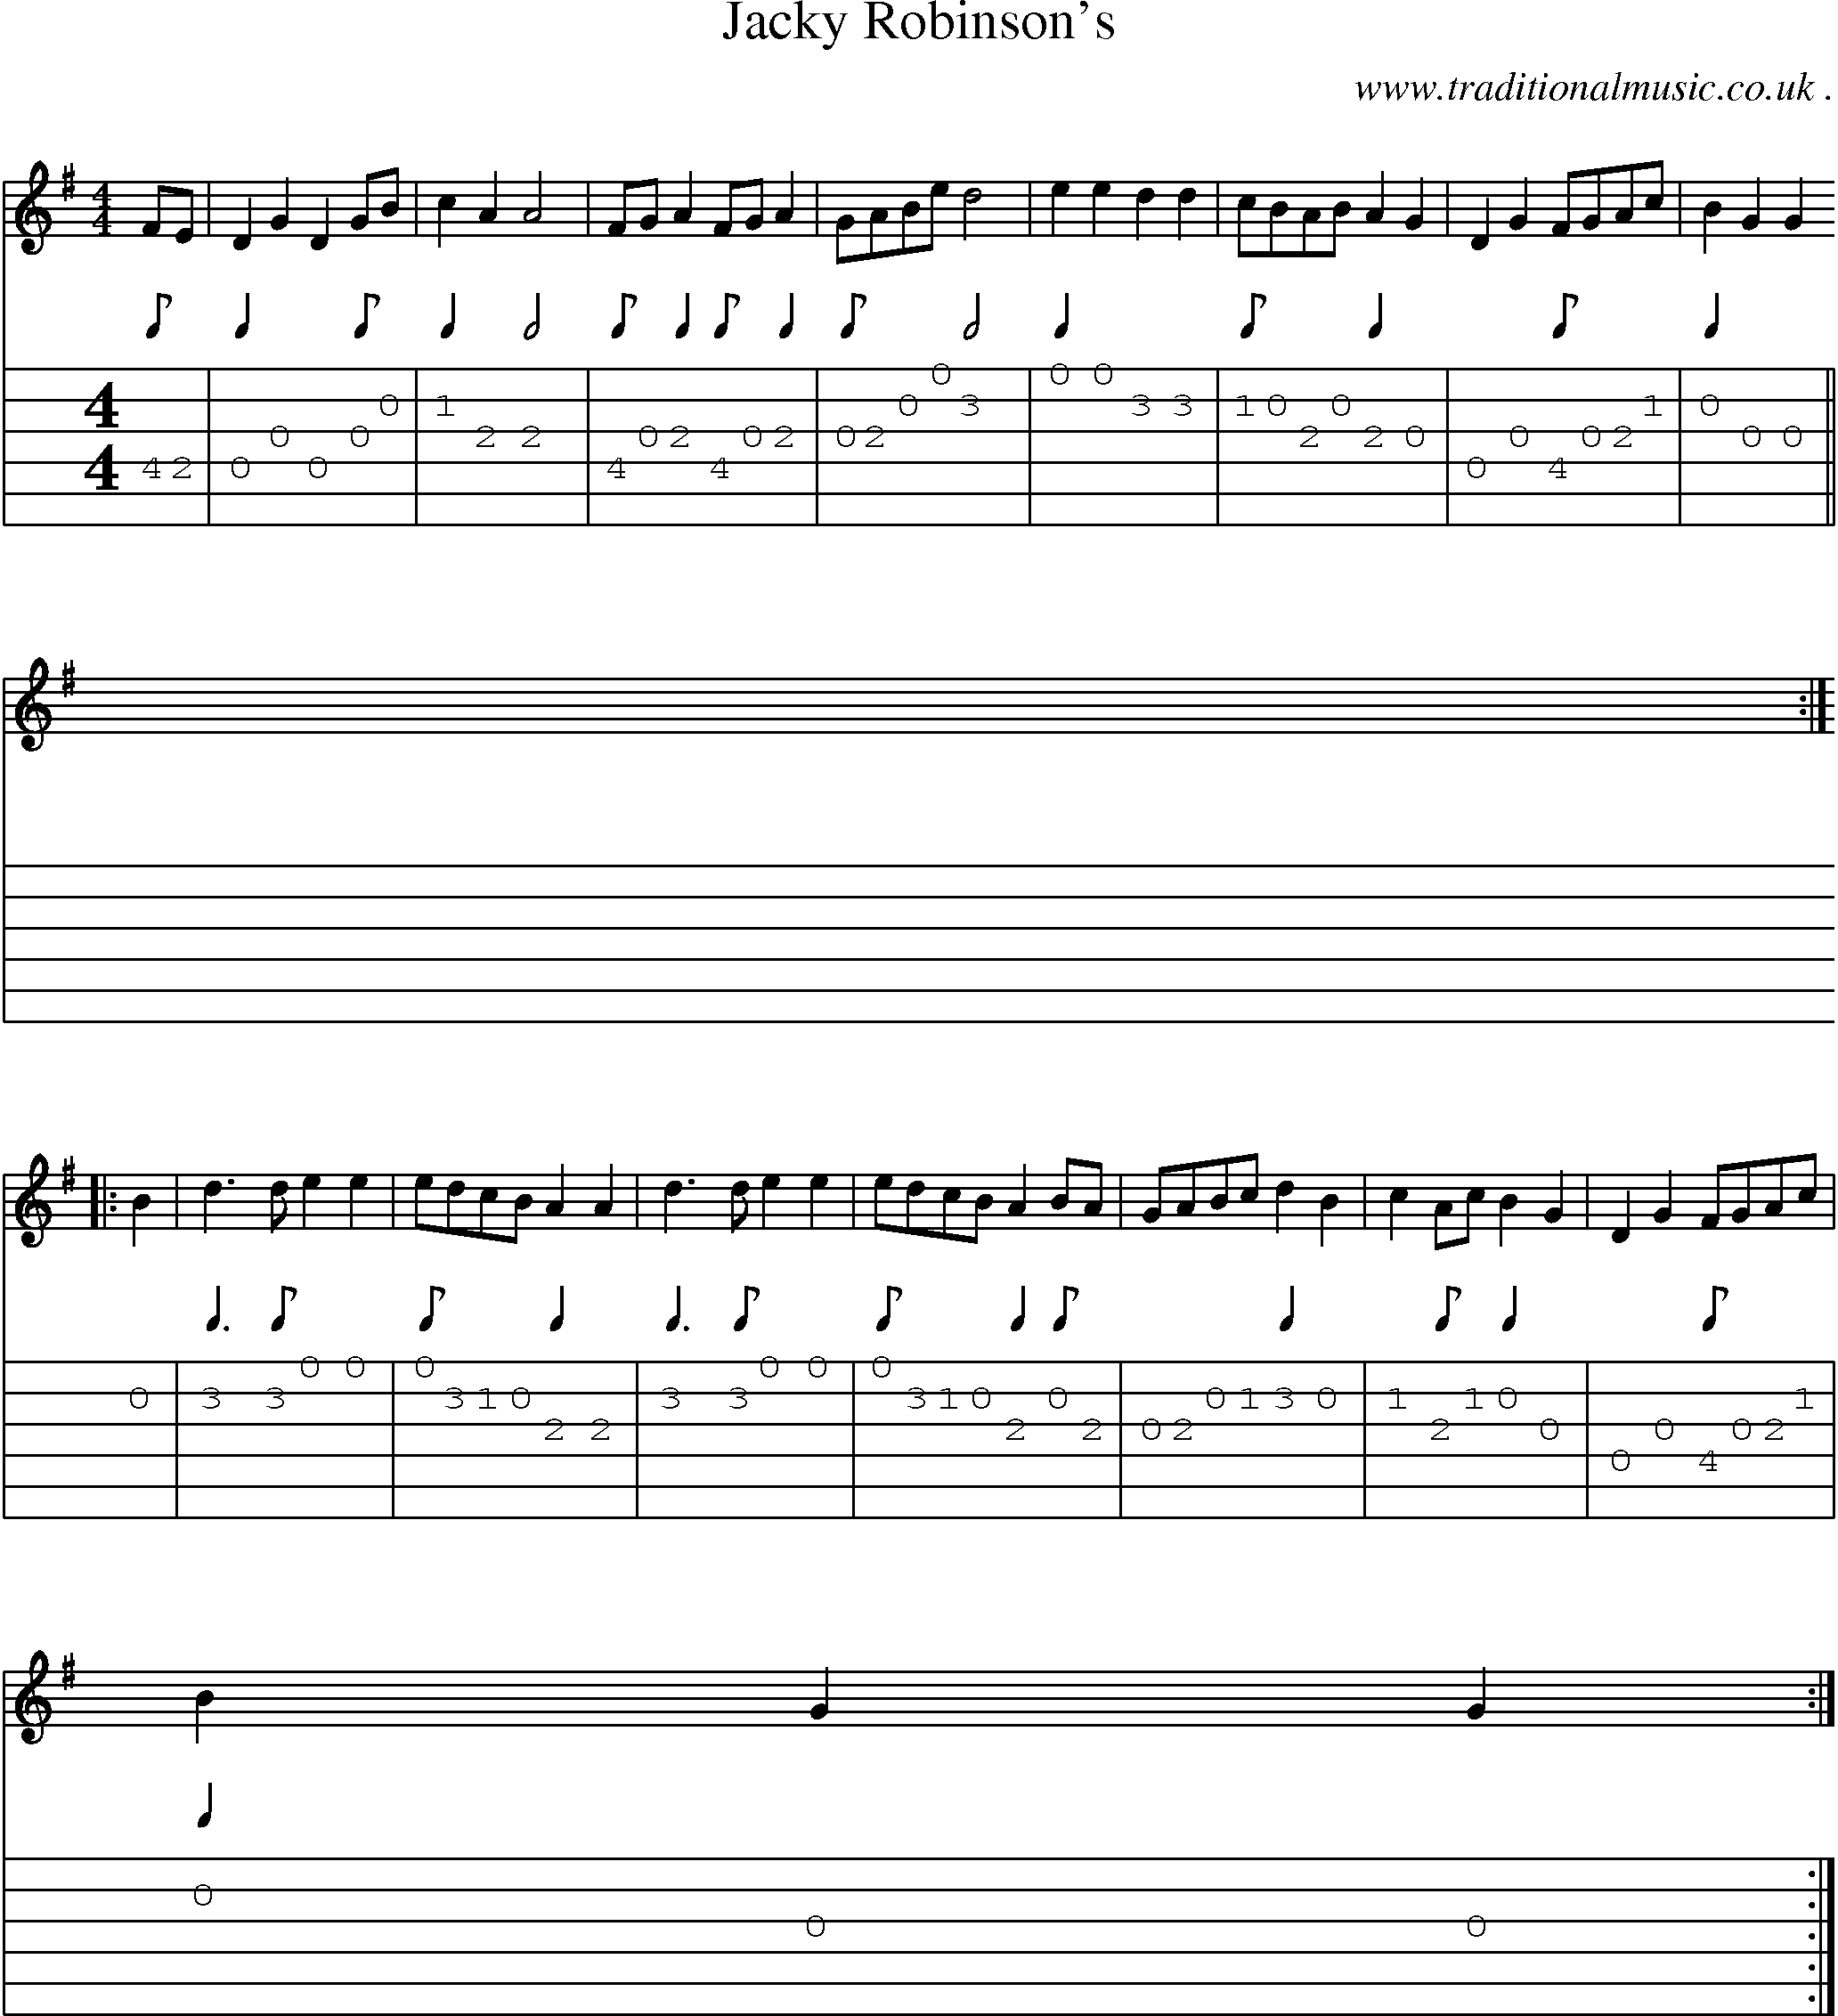 Sheet-Music and Guitar Tabs for Jacky Robinsons